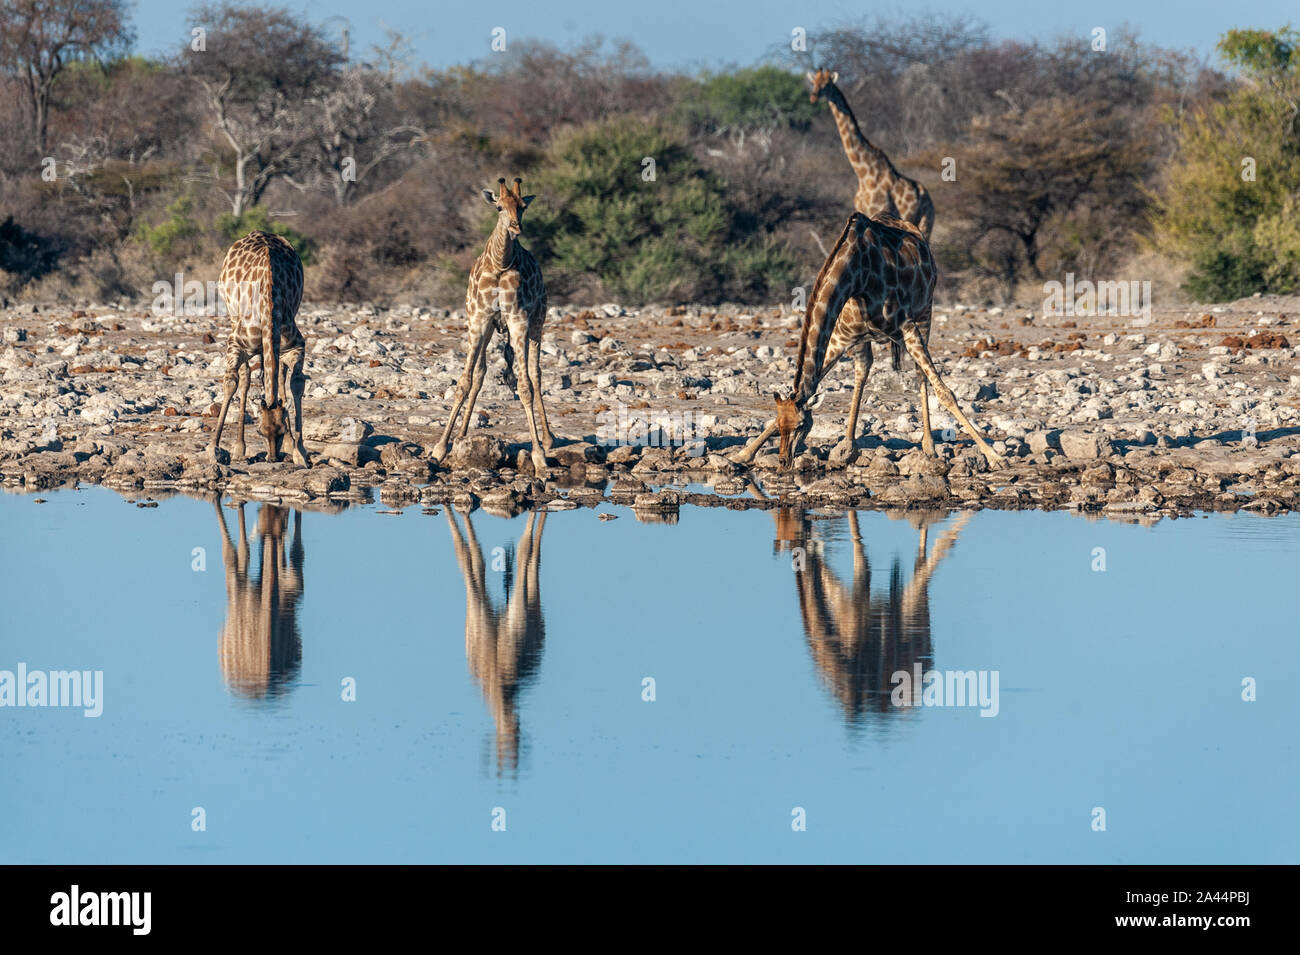 A group of Angolan Giraffe - Giraffa giraffa angolensis- drinking from a waterhole, while being reflected in the surface of the water. Etosha National Park, Namibia. Stock Photo